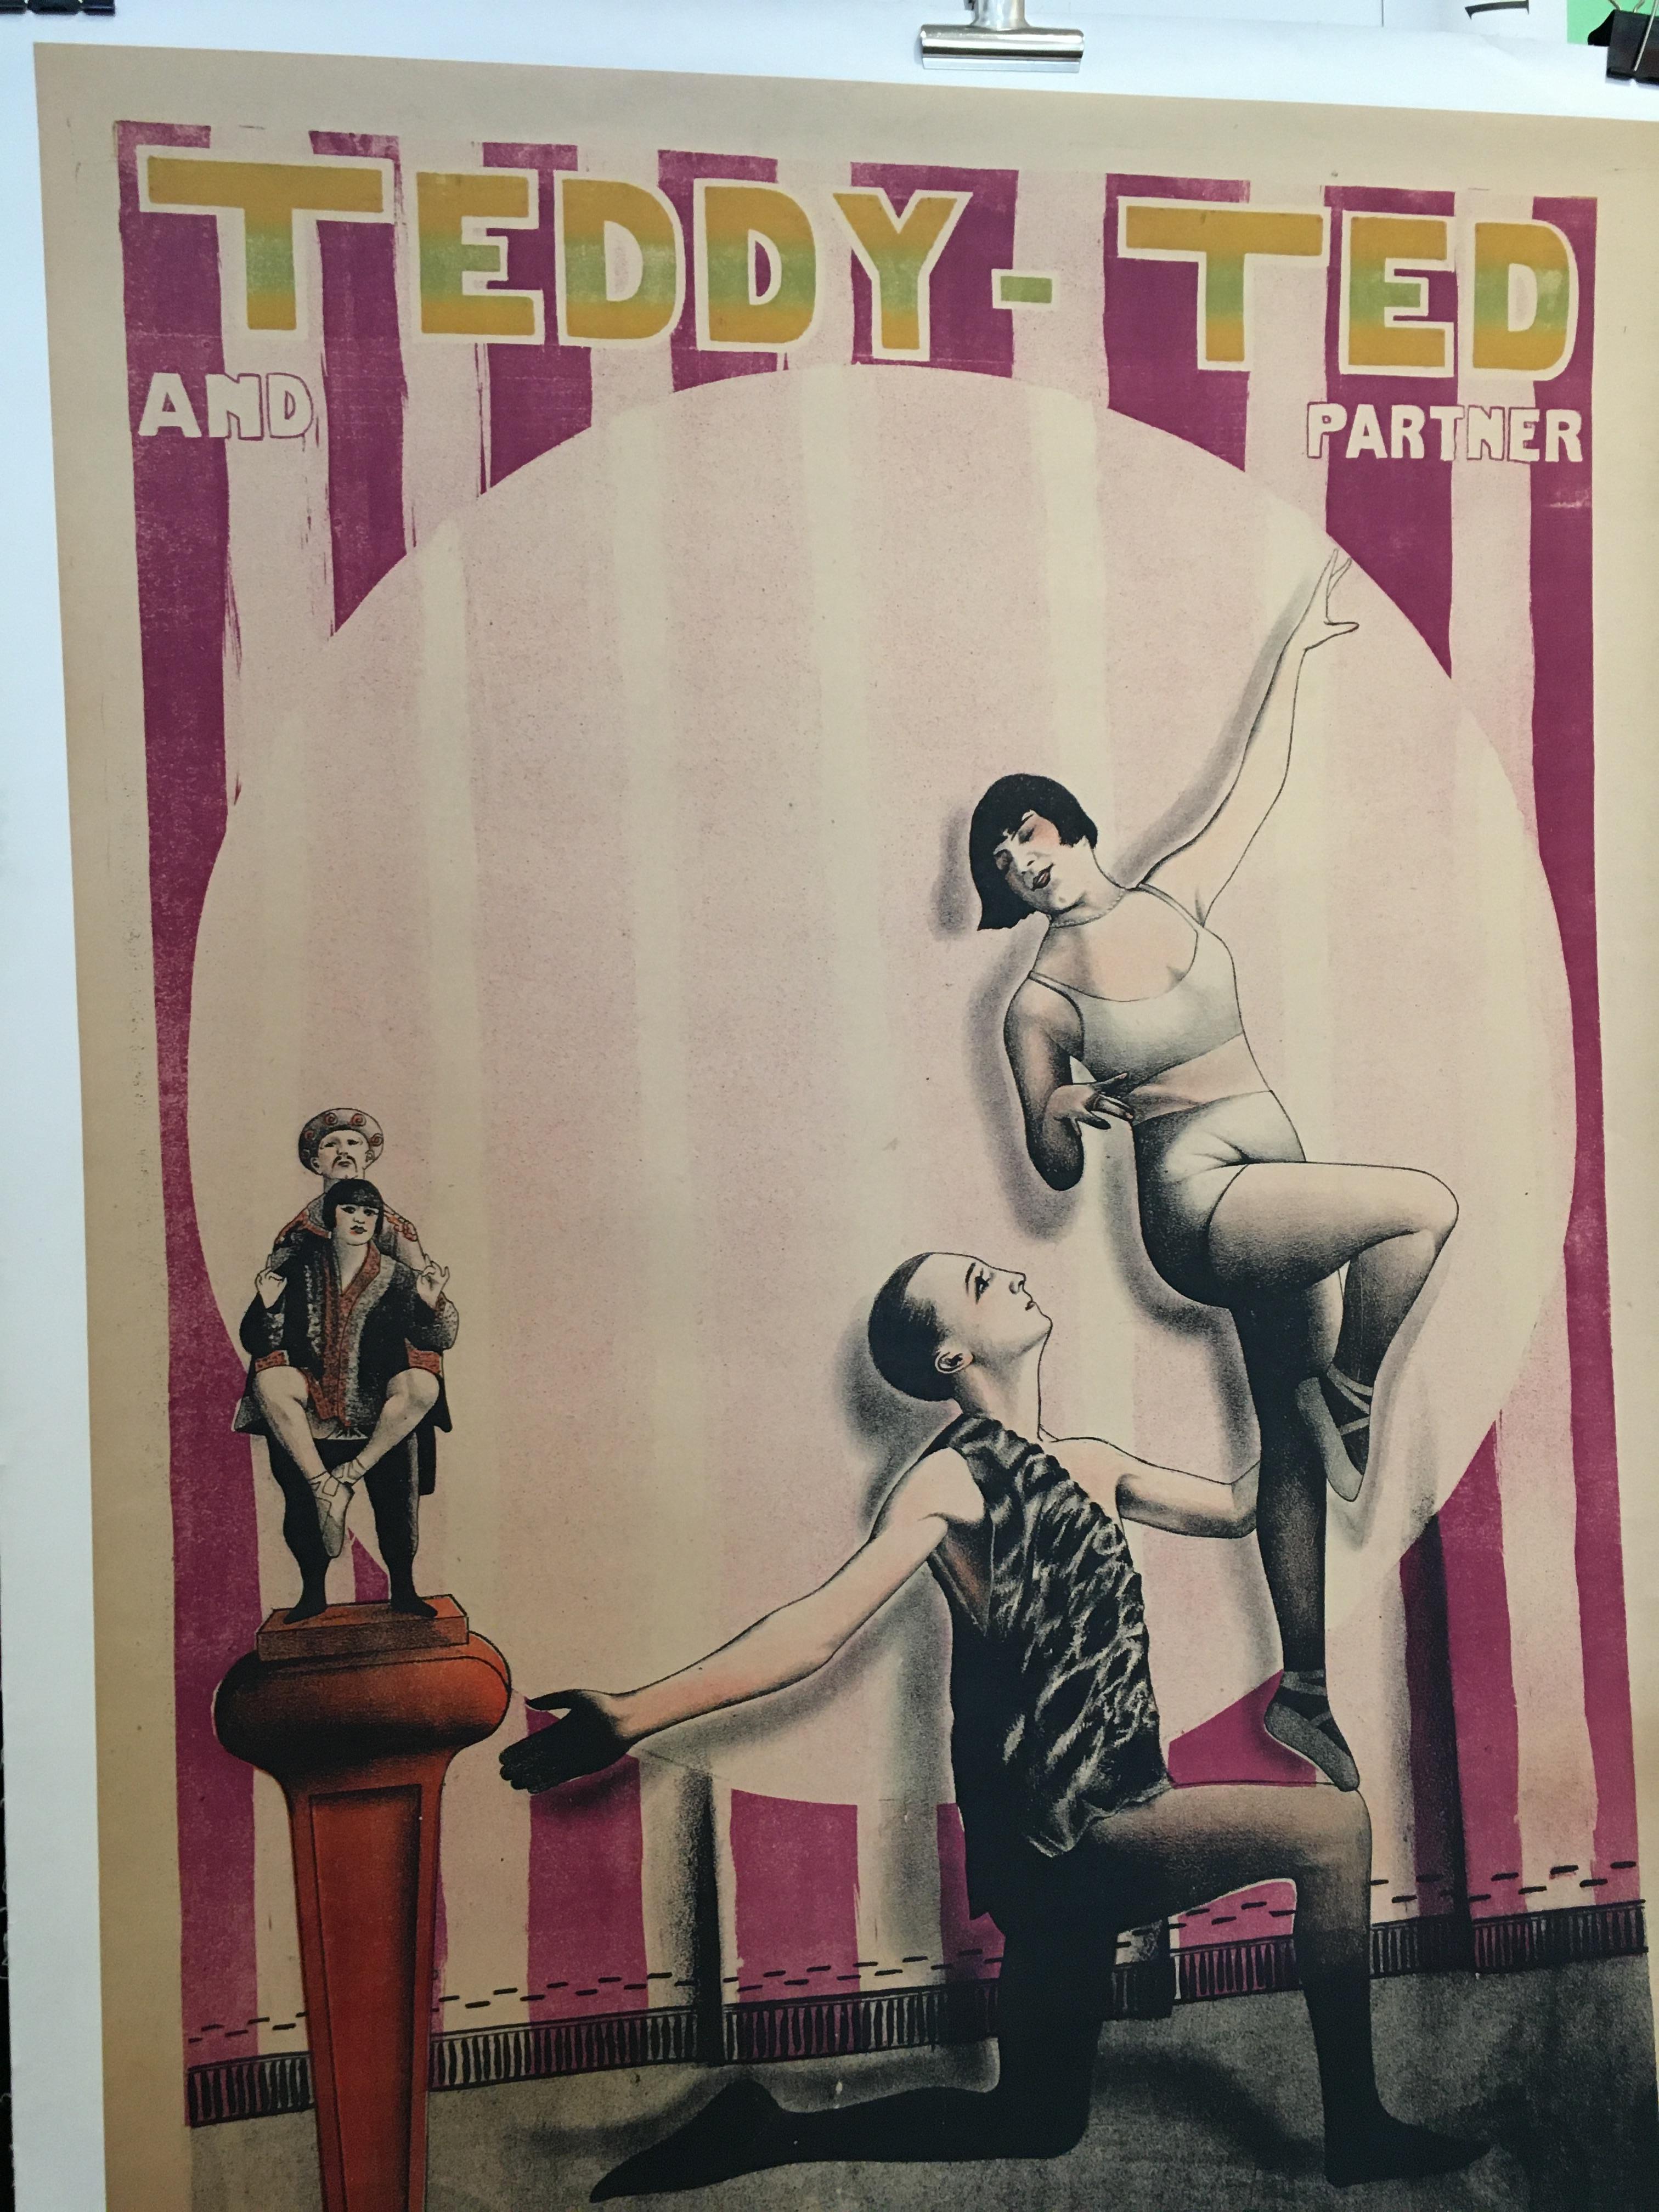 Art Deco Original Vintage French Circus Poster 'Teddy-Ted And Partner', 1926 In Good Condition For Sale In Melbourne, Victoria